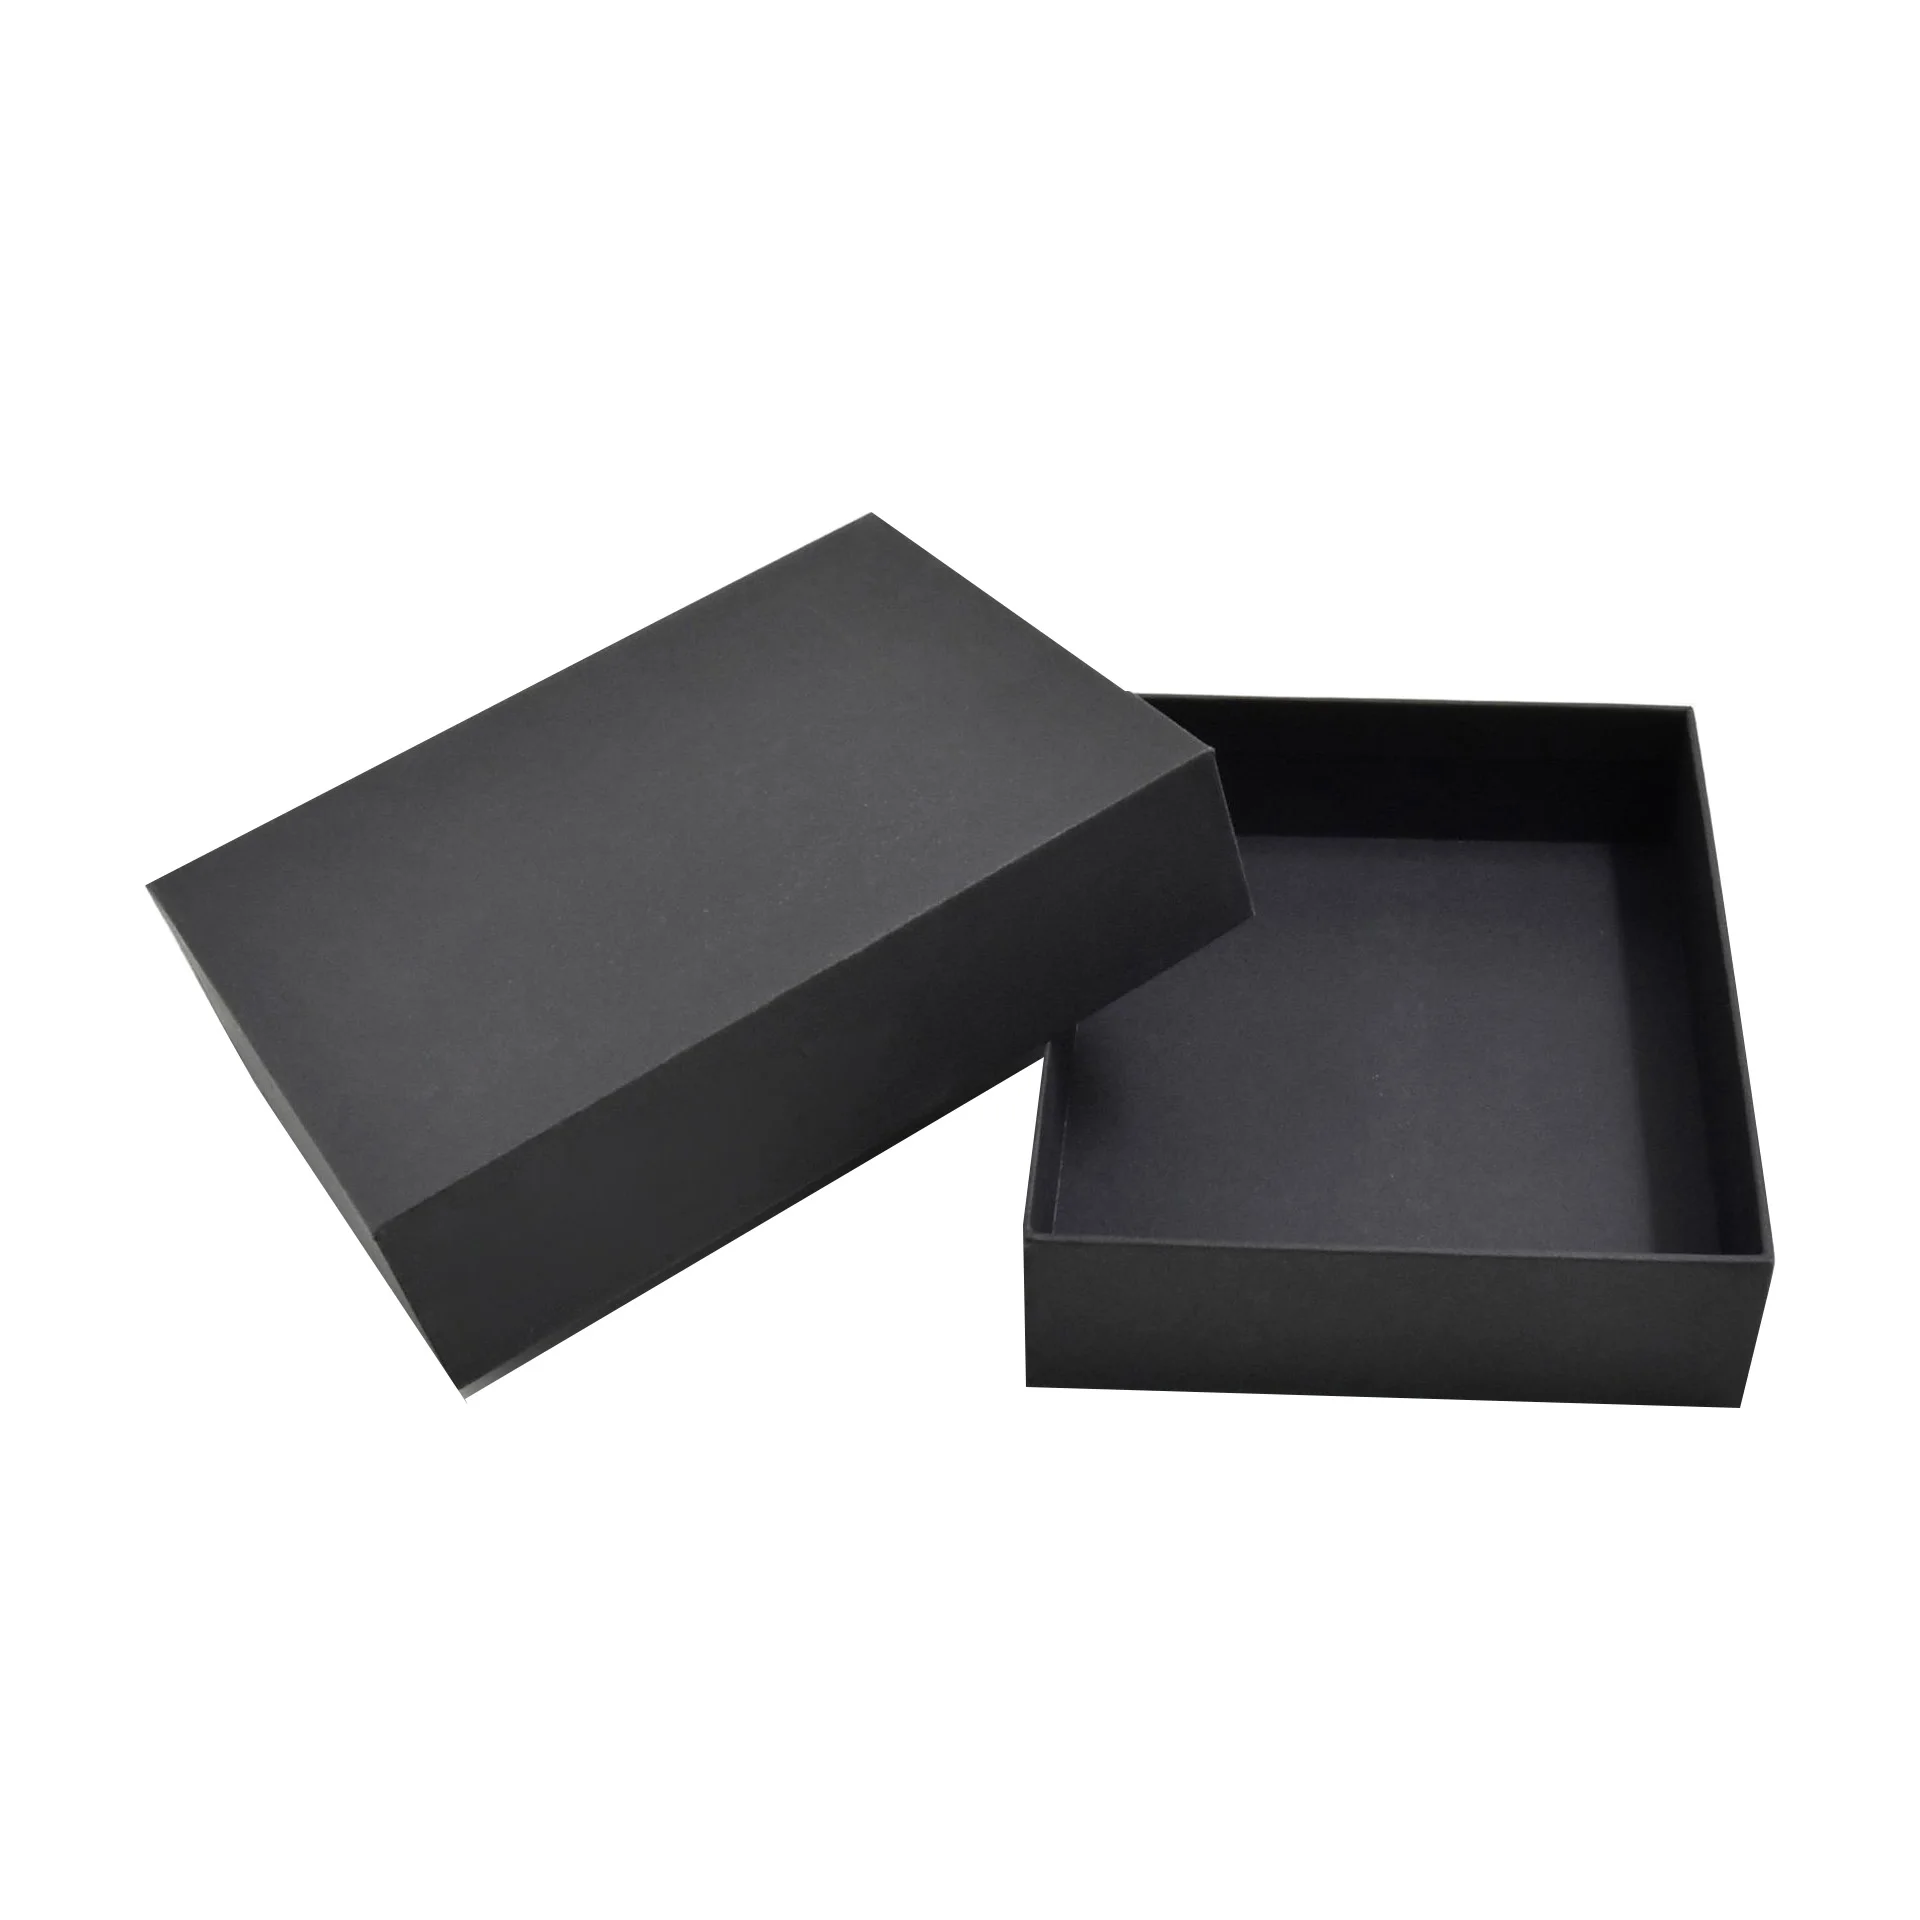 

Retail black rectangle gift box cosmetic rigid box packaging with lid rigid large cardboard jewelry paper gift box